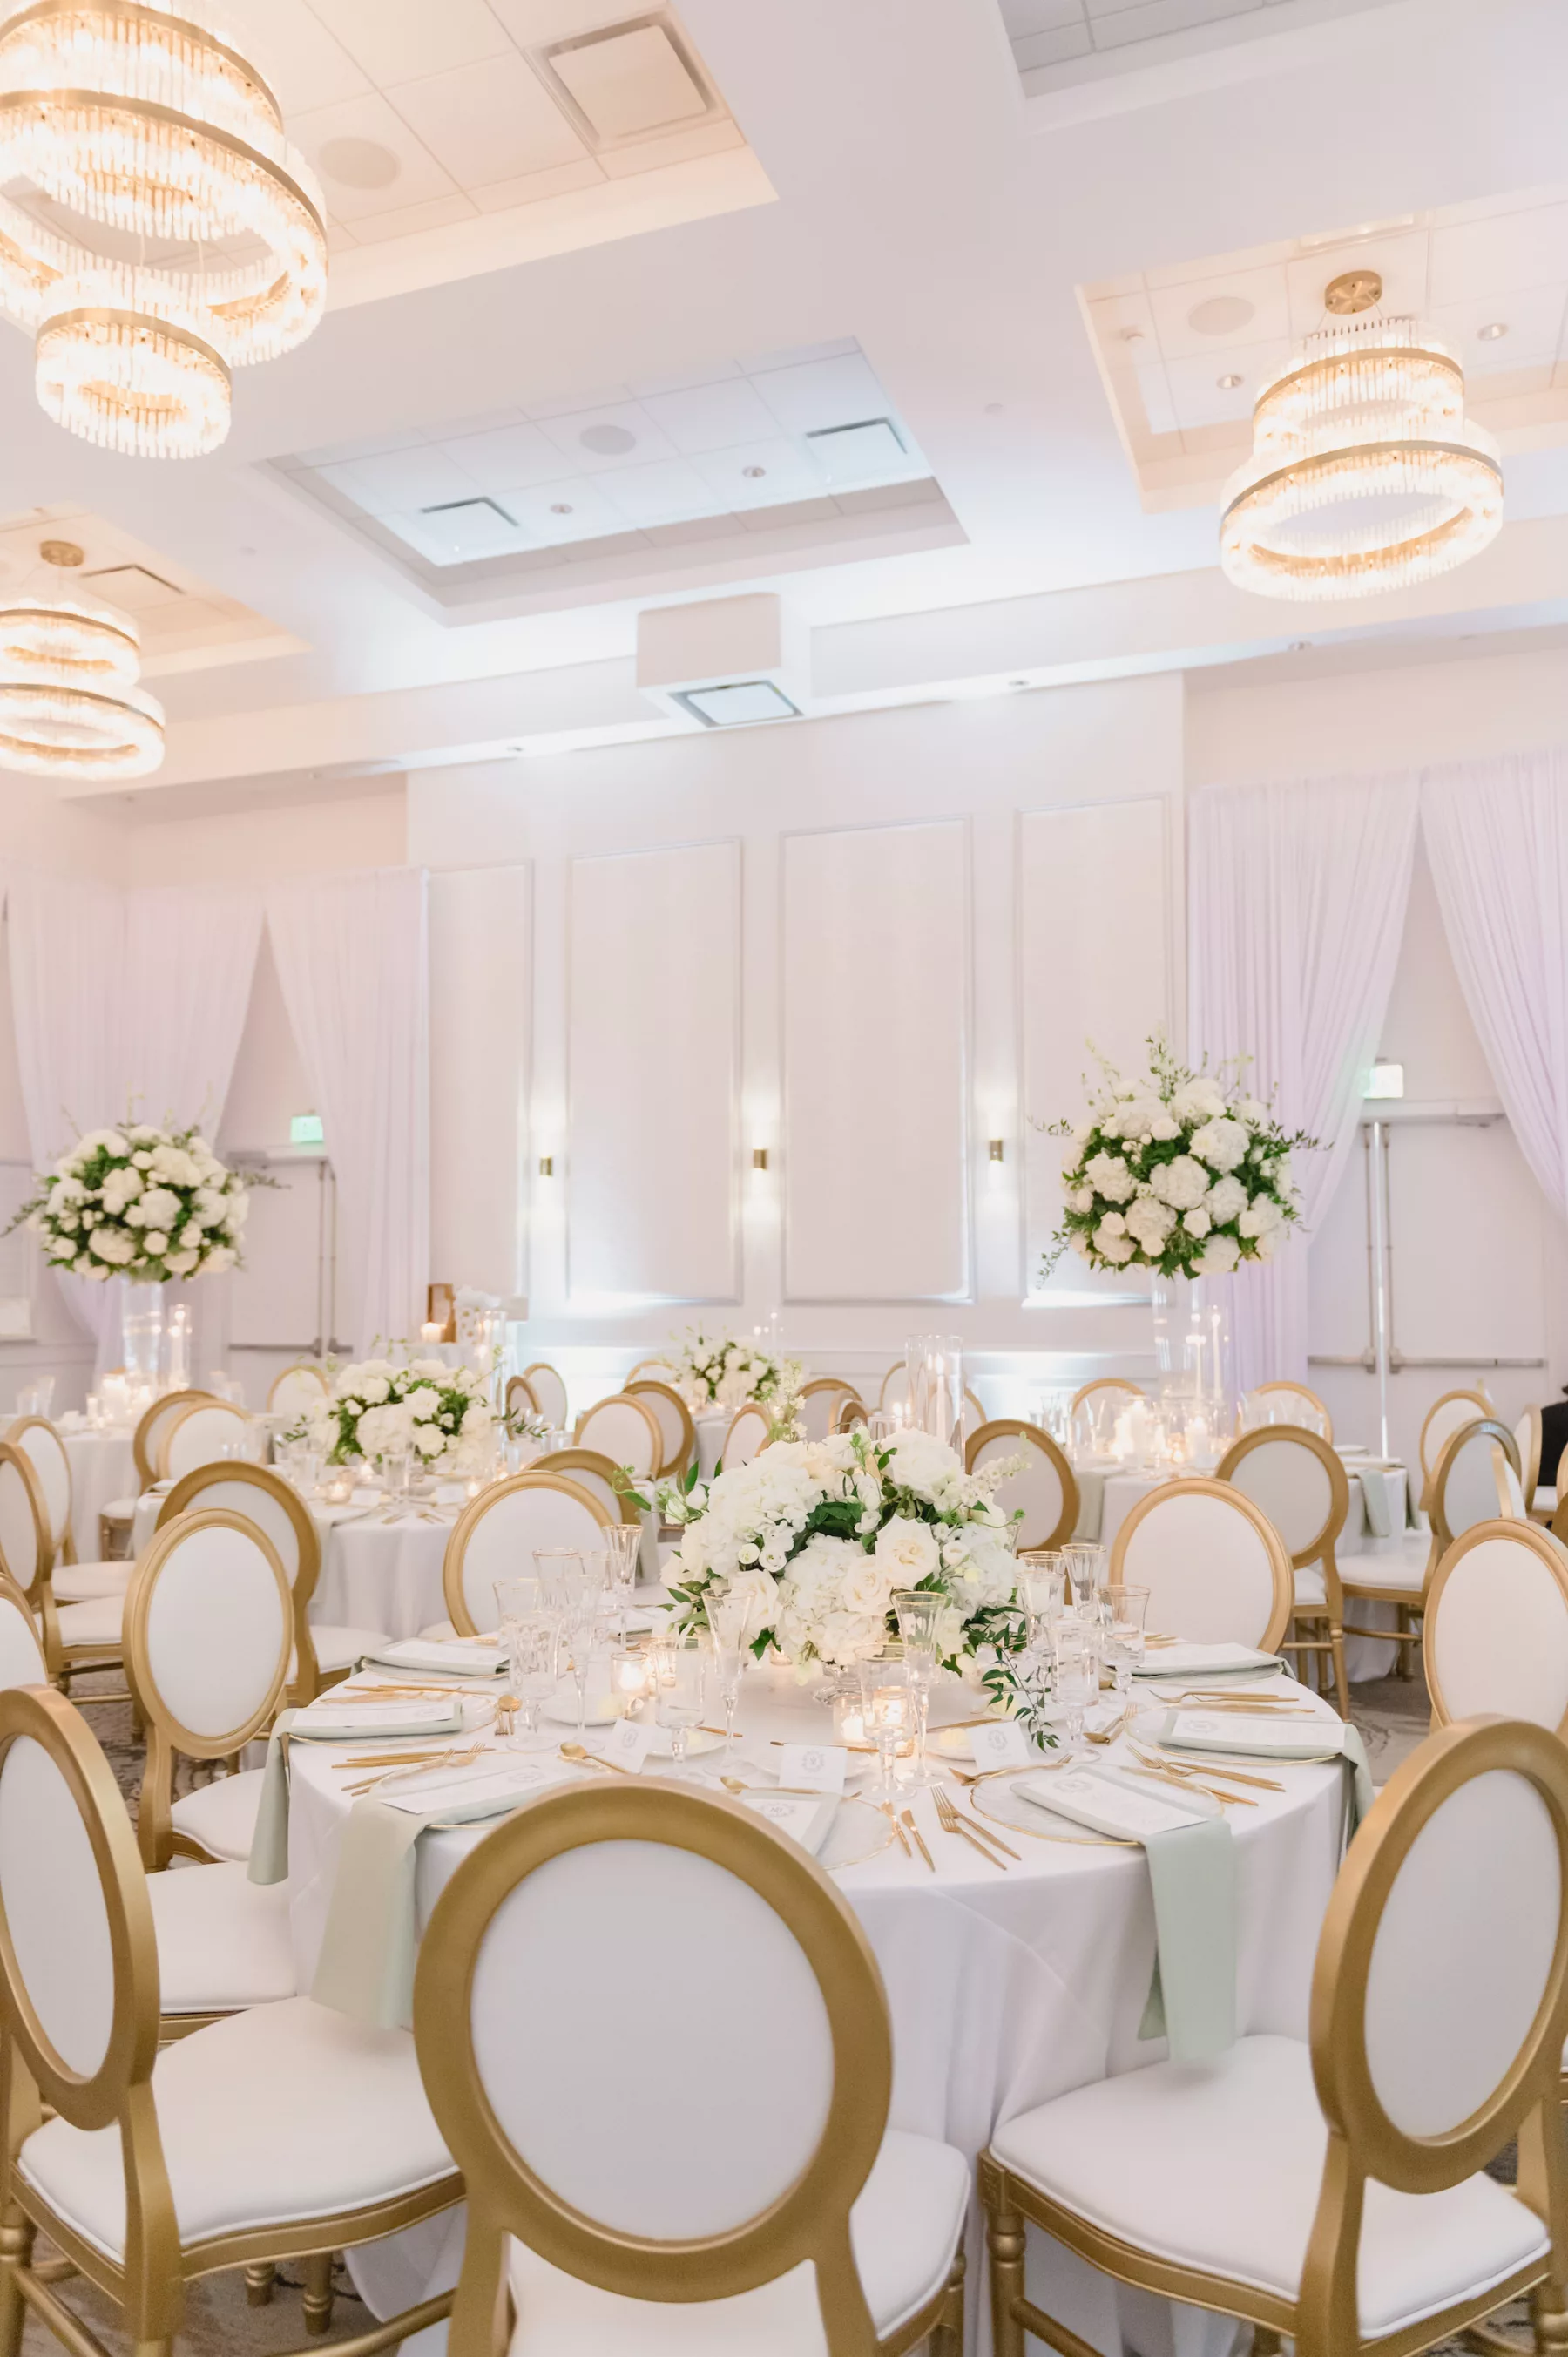 Classic White and Gold Spring Ballroom Wedding Reception Inspiration | Louis Chair Ideas | Tampa Bay Kate Ryan Event Rentals | Florist Bruce Wayne Florals